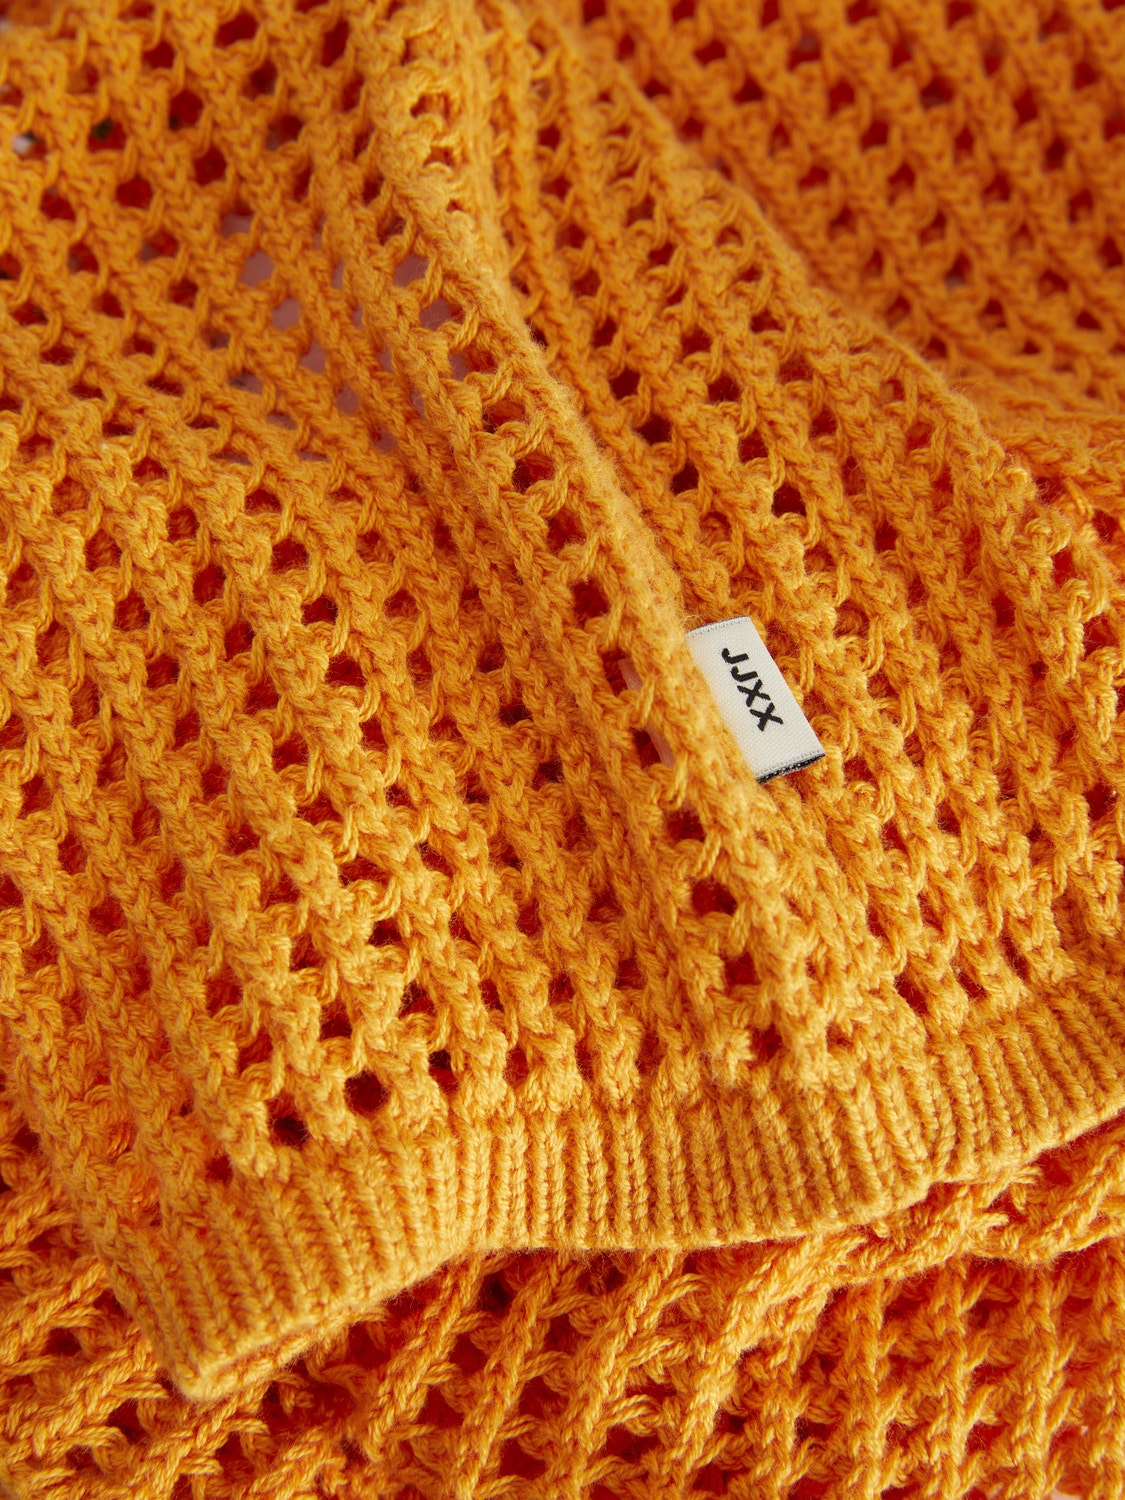 JJXX JXPRESLEY Pull en maille à col rond -Apricot - 12255146